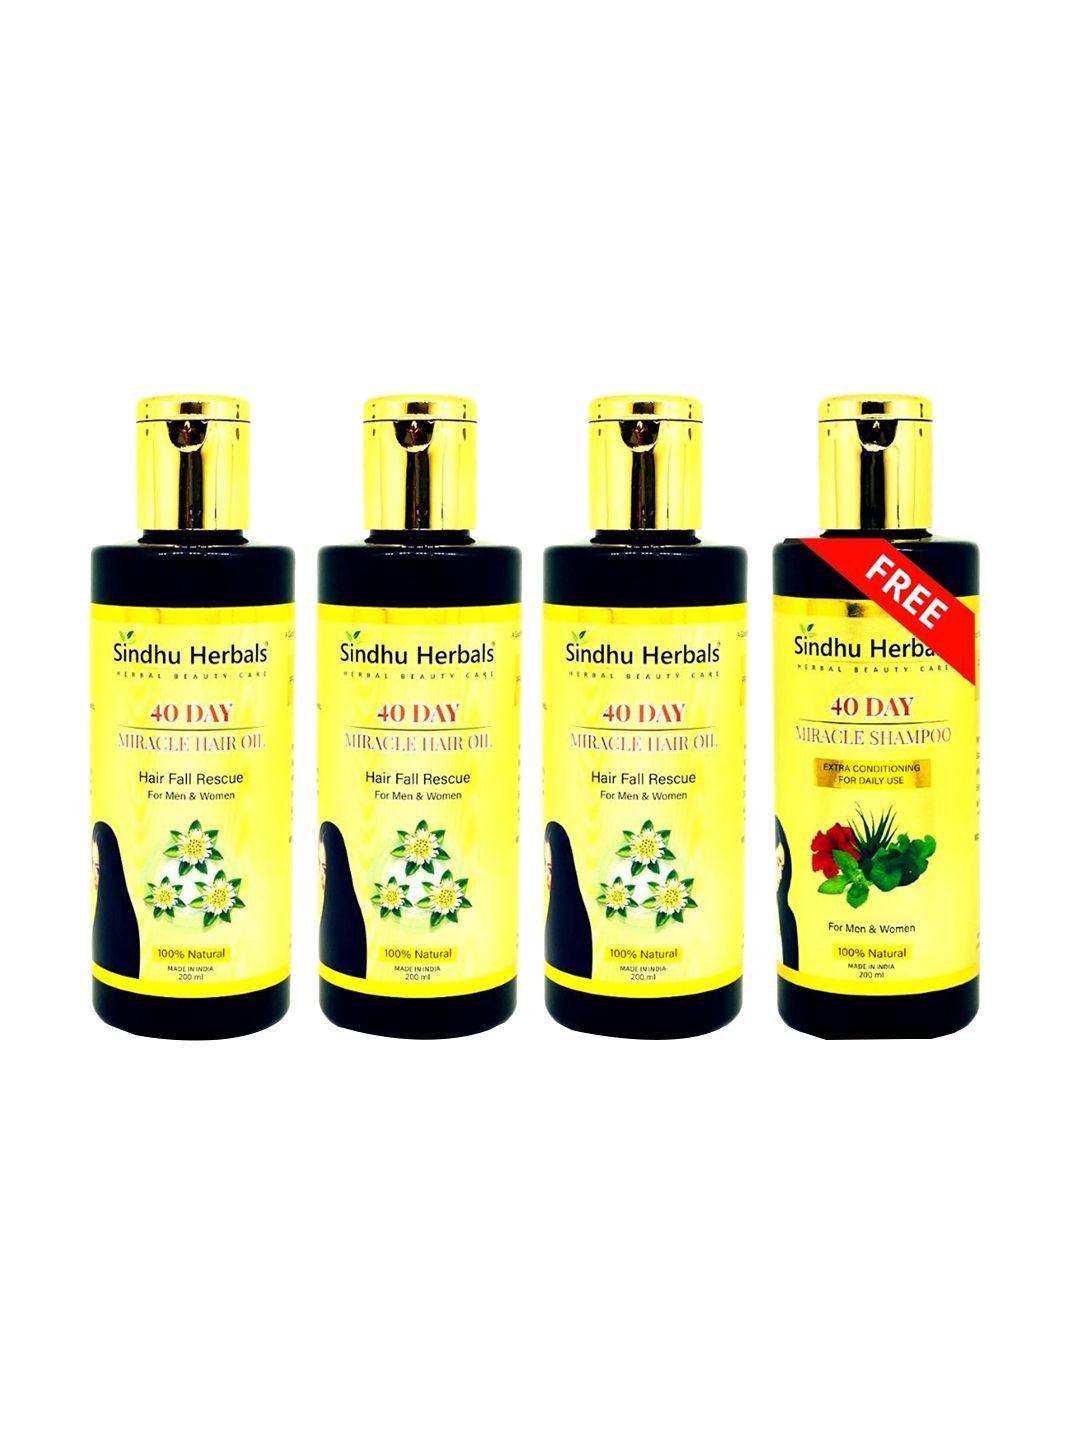 Sindhu Herbals Buy 3 40-Day Miracle Hair Oils & Get 1 40-Day Miracle Shampoo Free Price in India